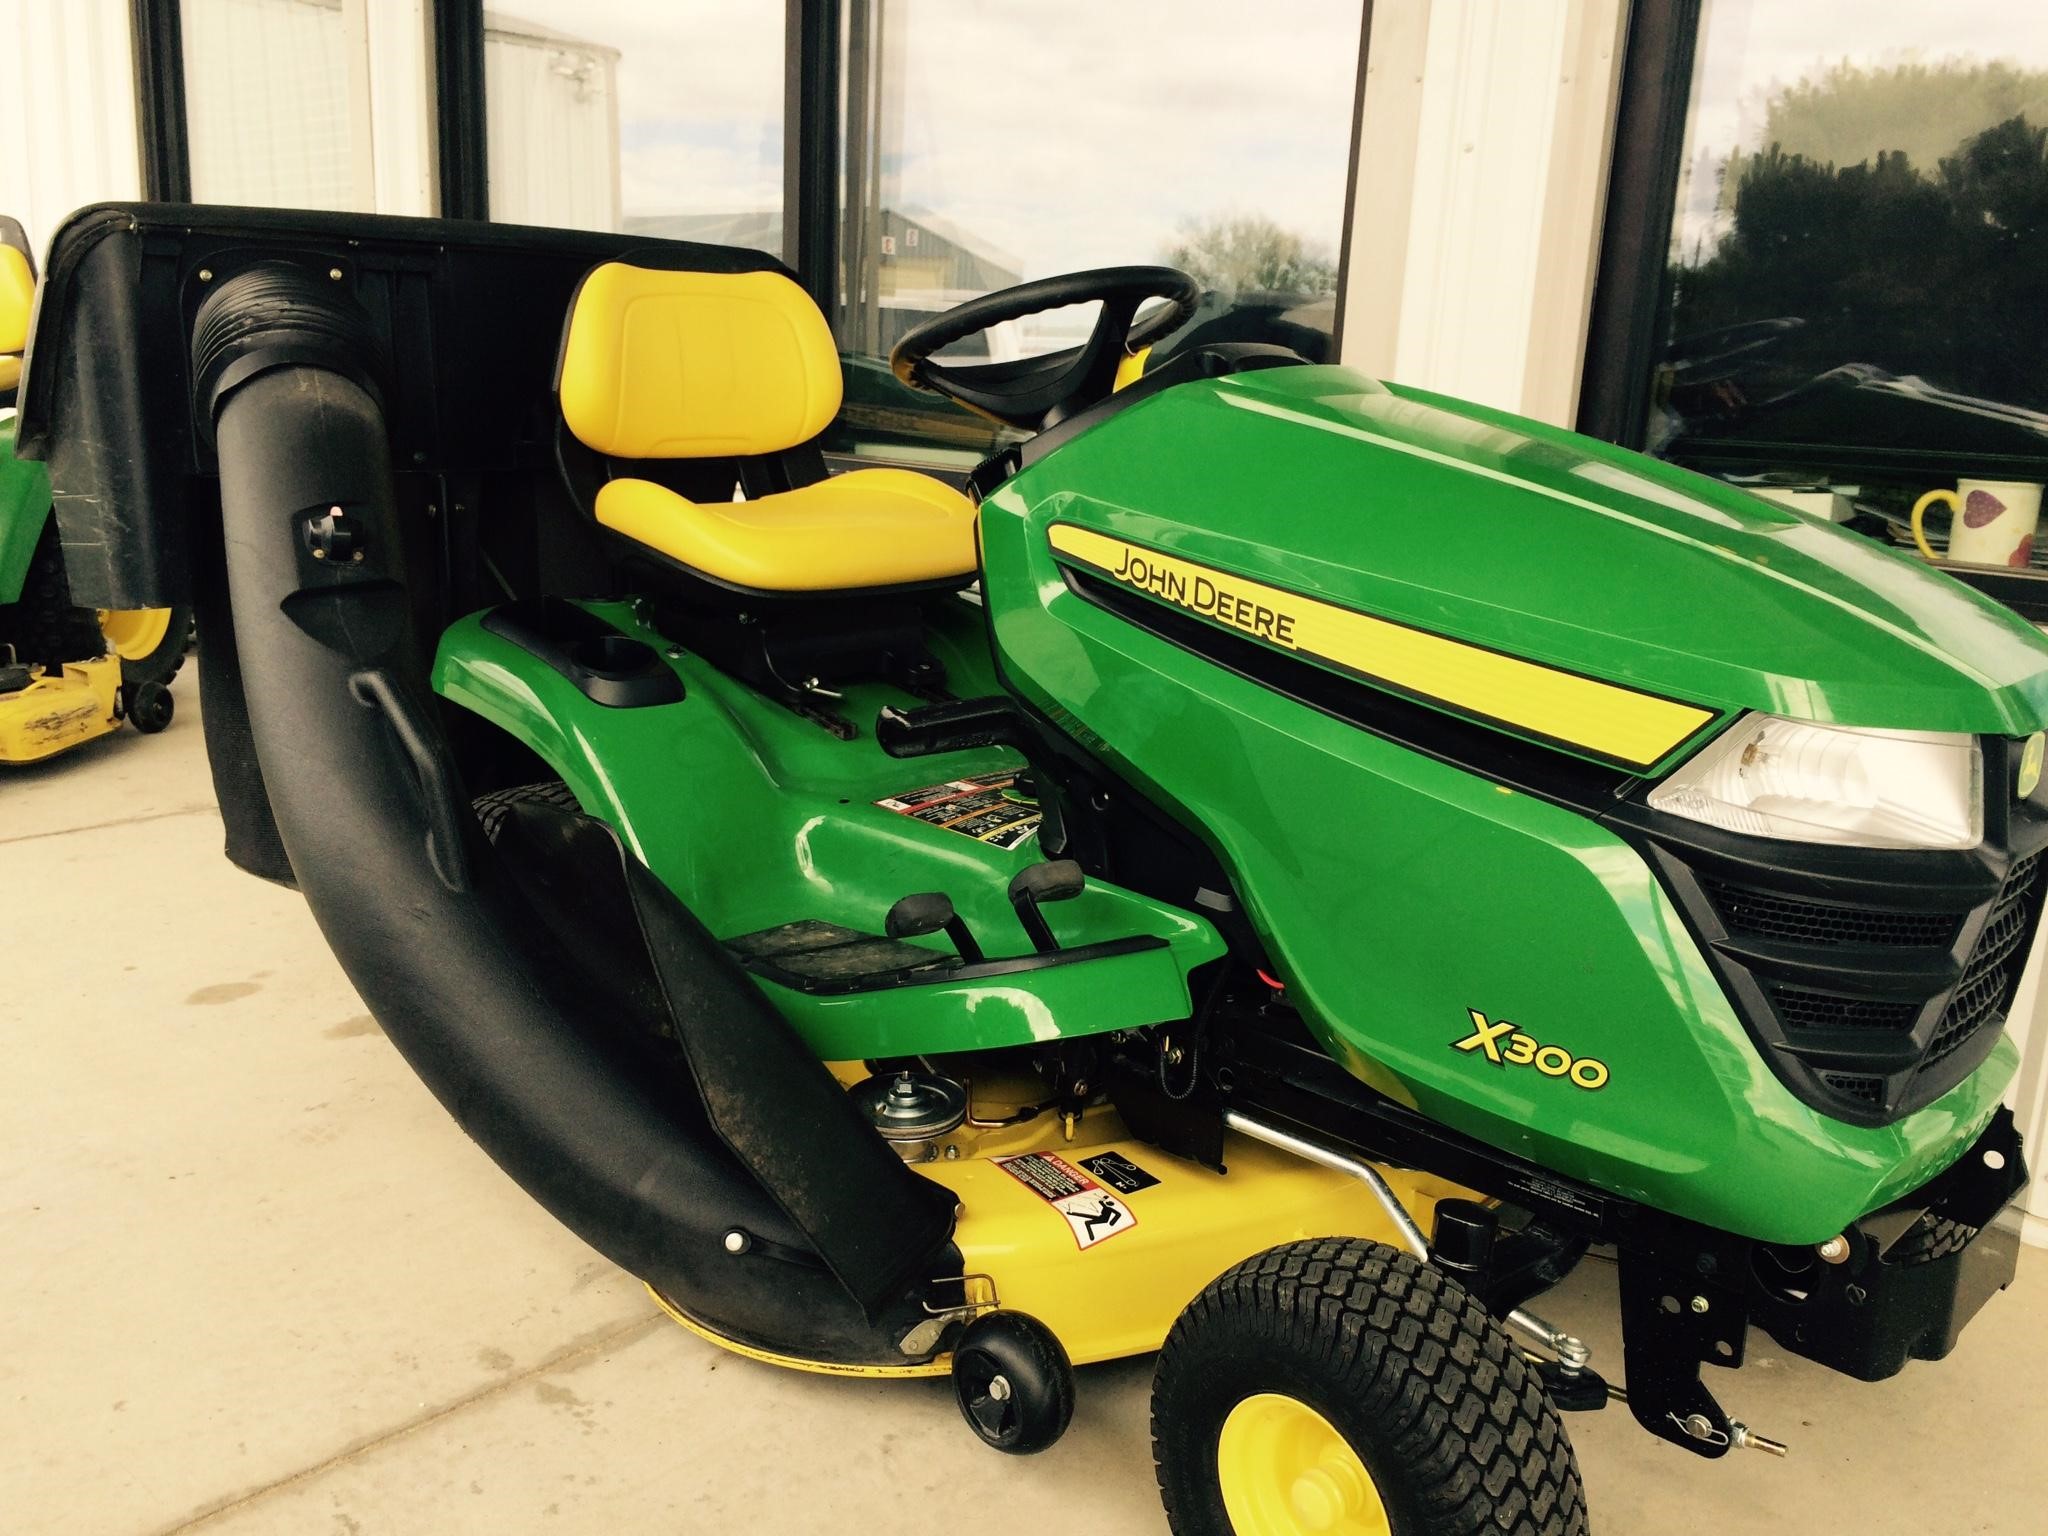 Wisconsin Ag Connection - JOHN DEERE X300 Riding Lawn Mowers for sale